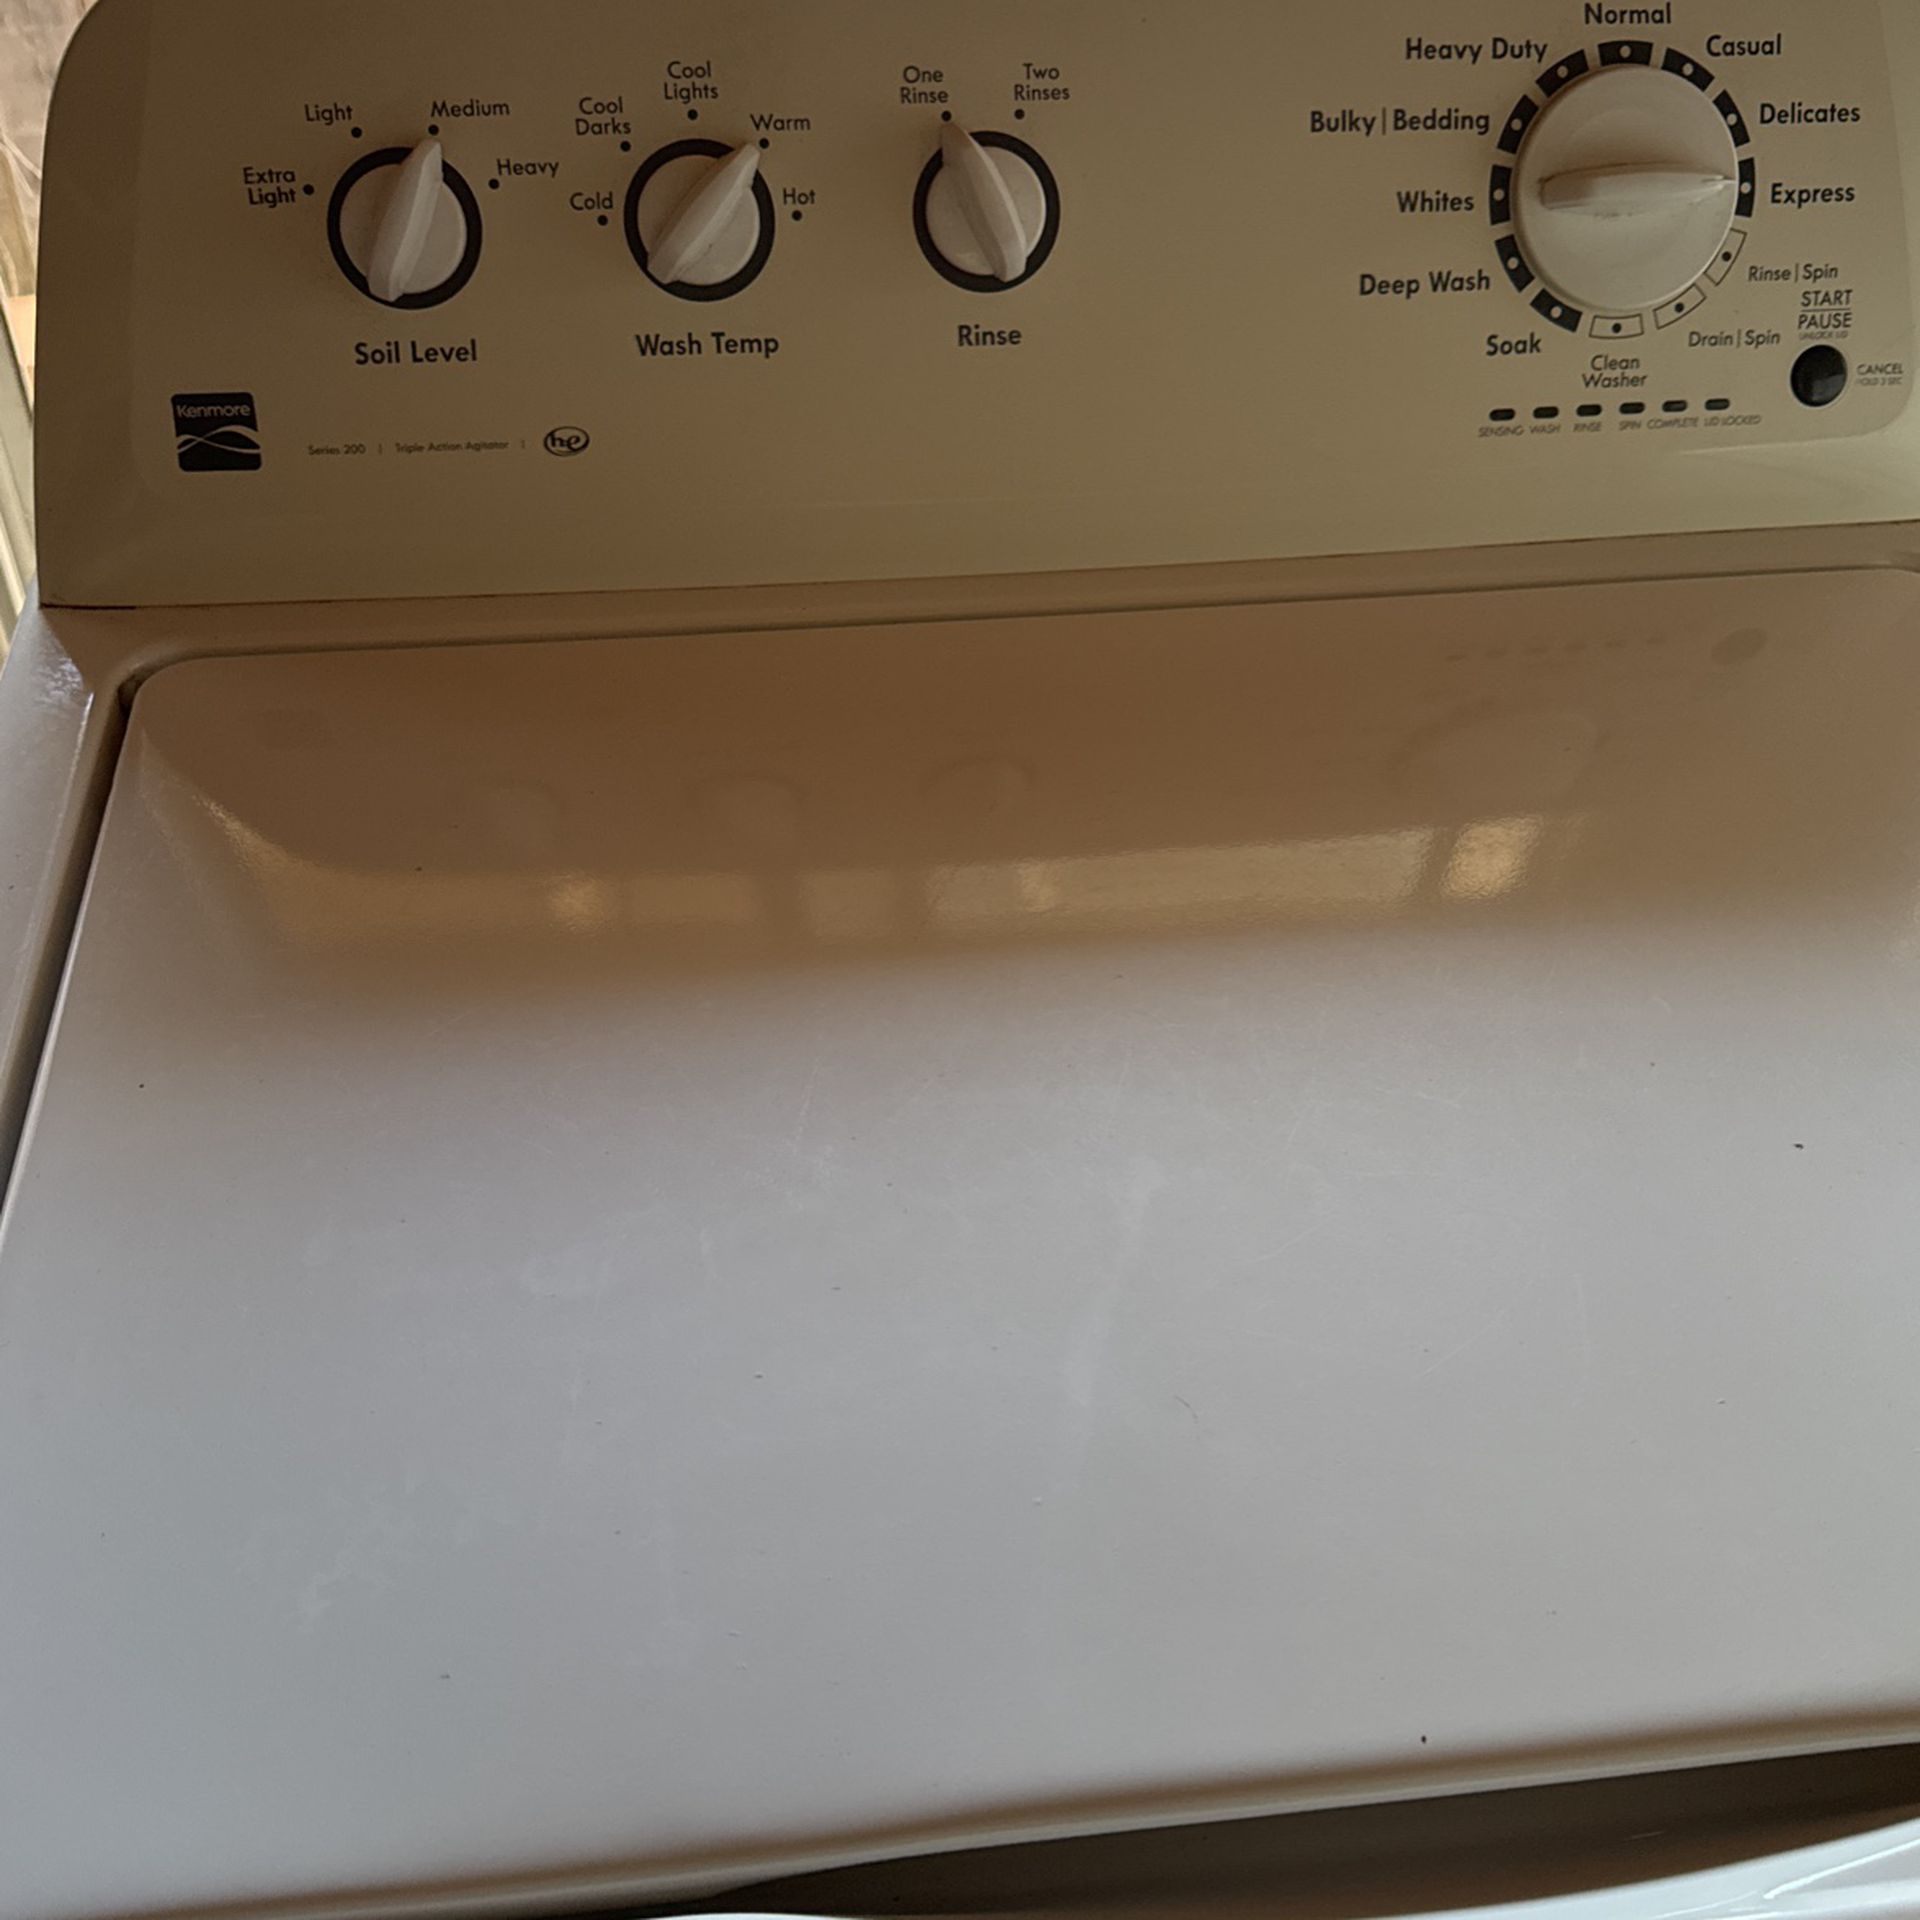 Kenmore Washer And Electric Dryer